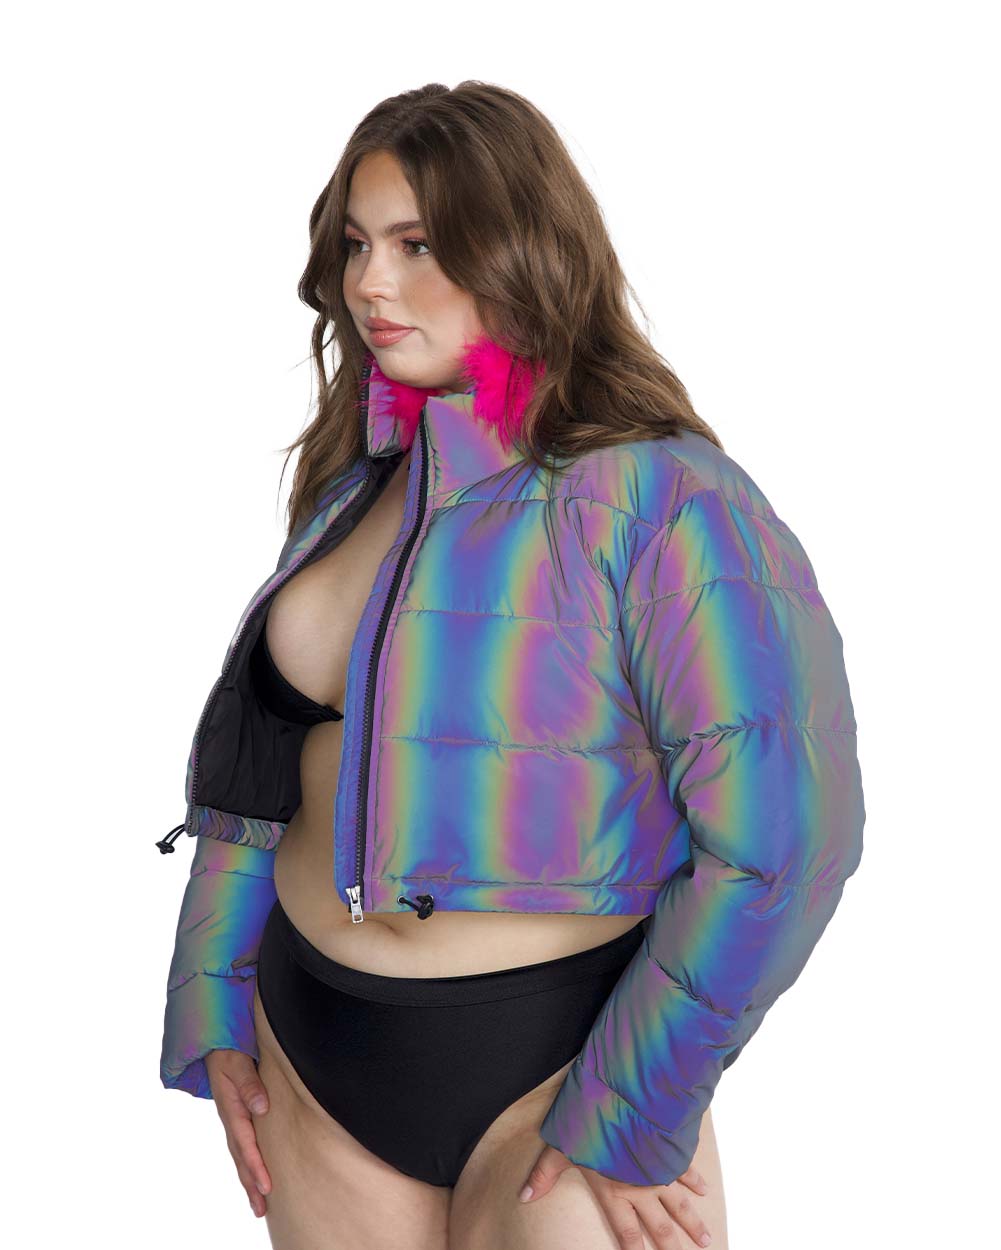 iHeartRaves Dreamy Much Iridescent Puffer Jacket